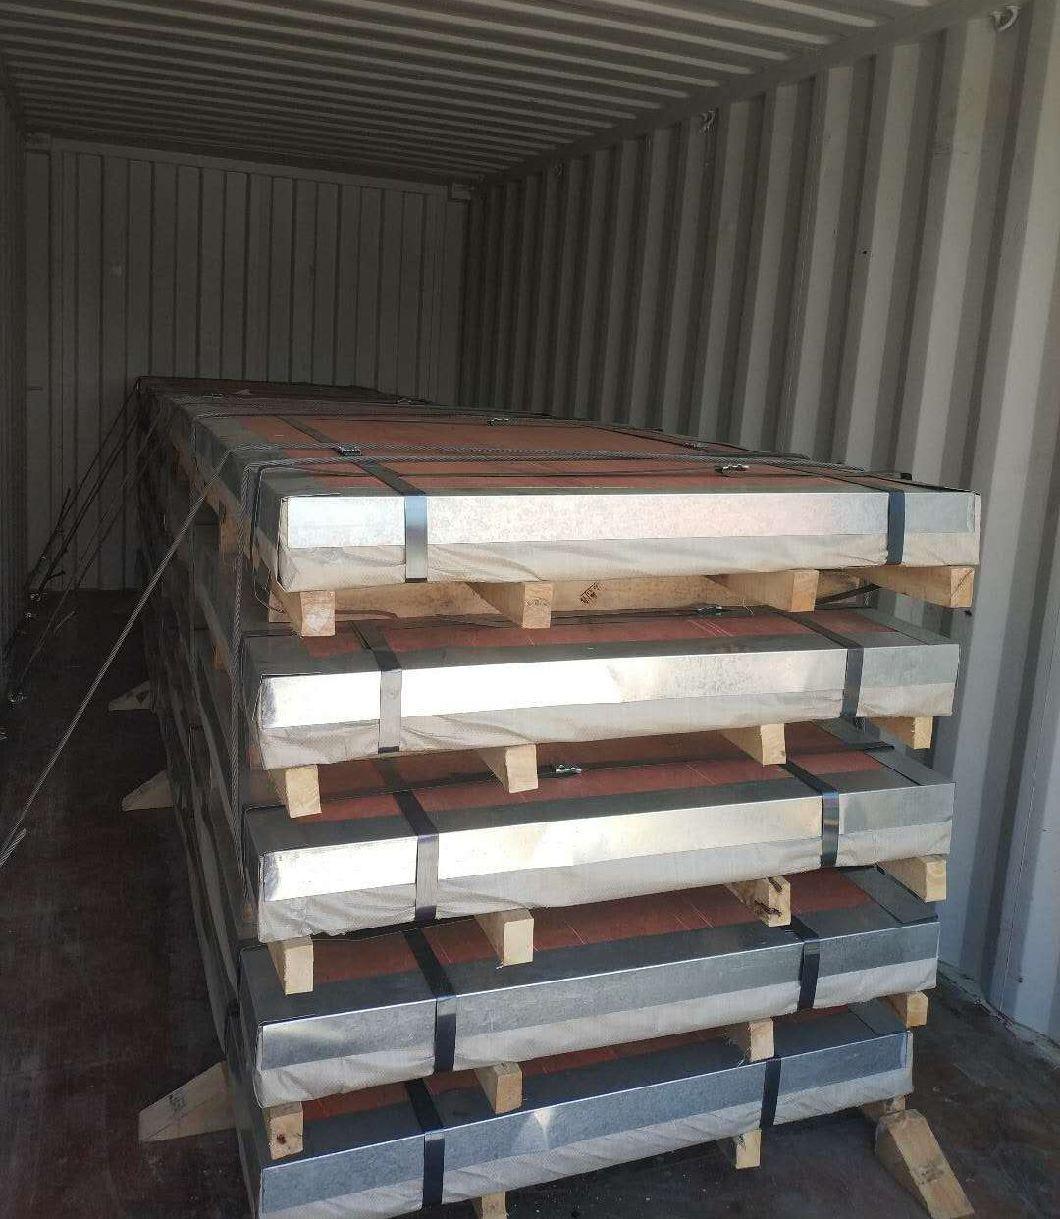 310 309 410 430 Stainless Steel Sheet Stainless Steel Sheet Thickness Stainless Steel Plate Price Per Kg